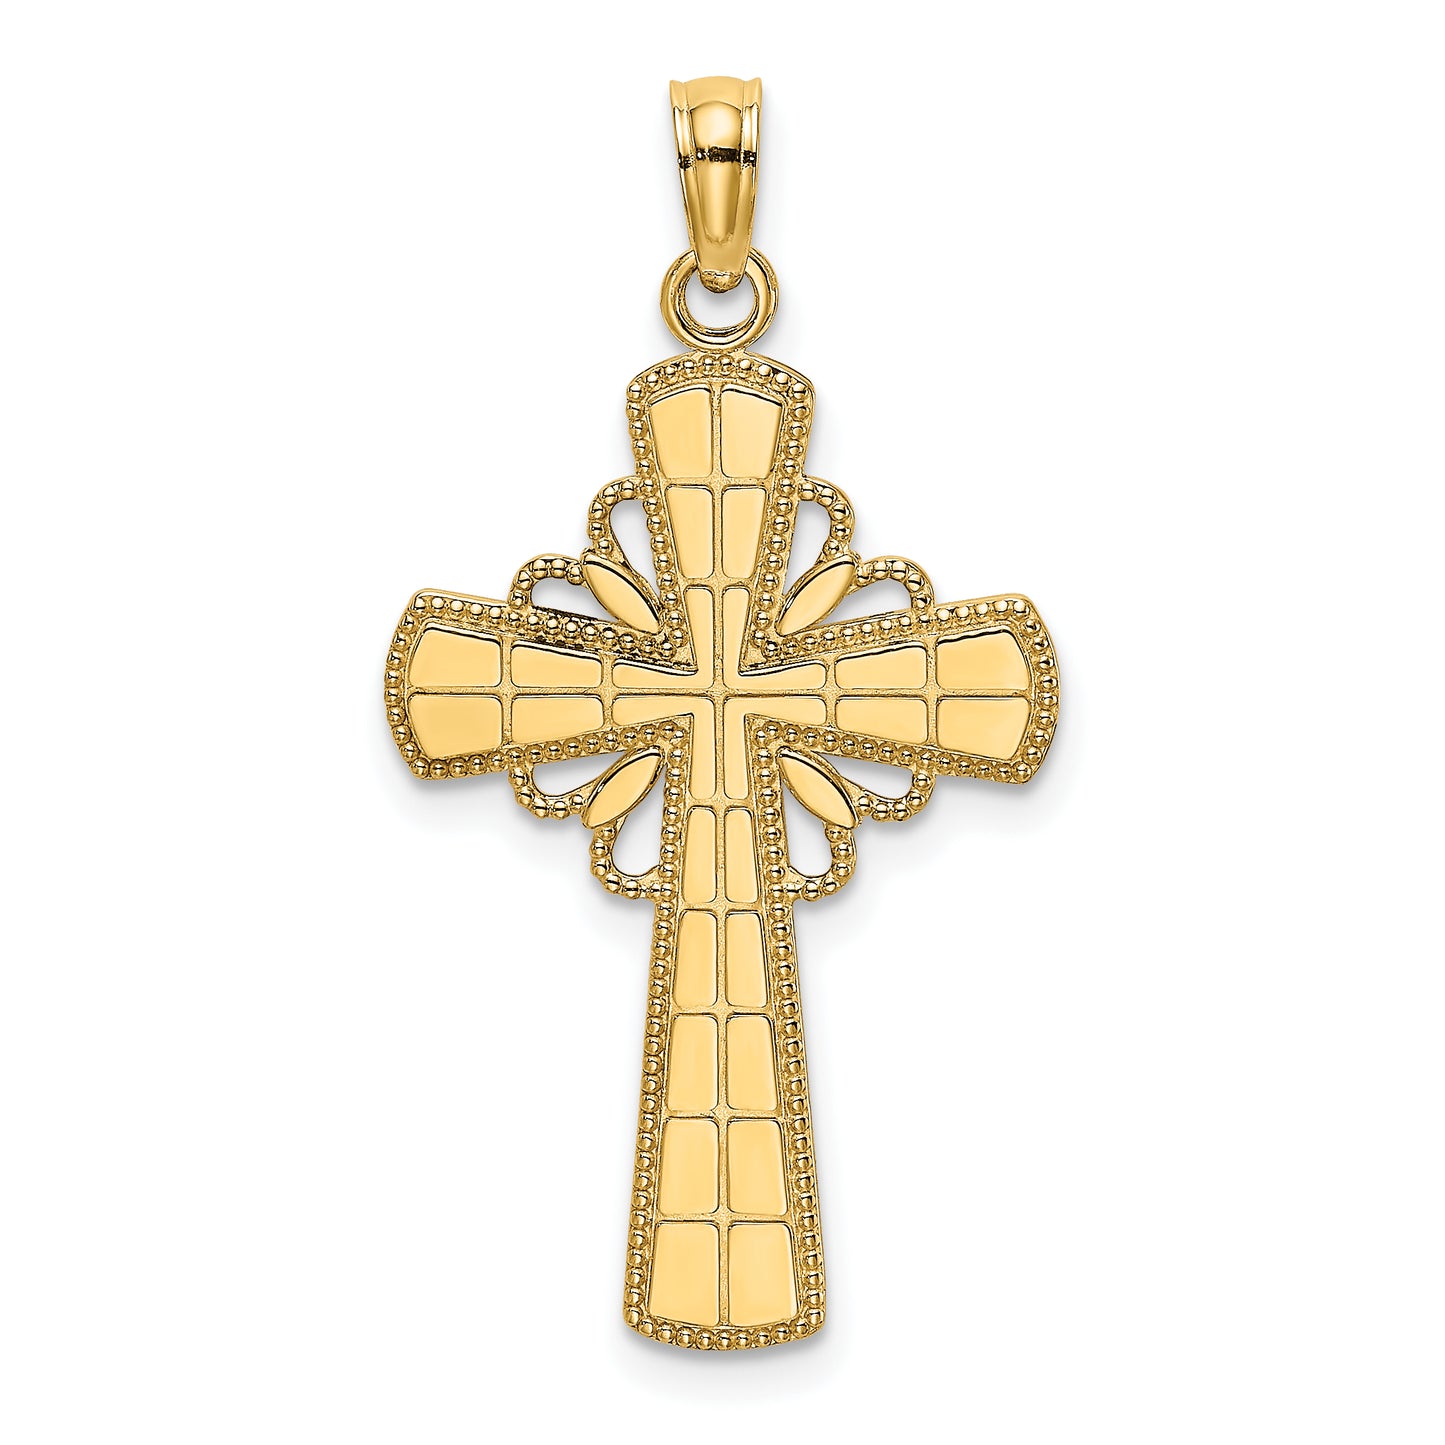 10K Polished with Beaded Edge Grid Accent Cross Charm